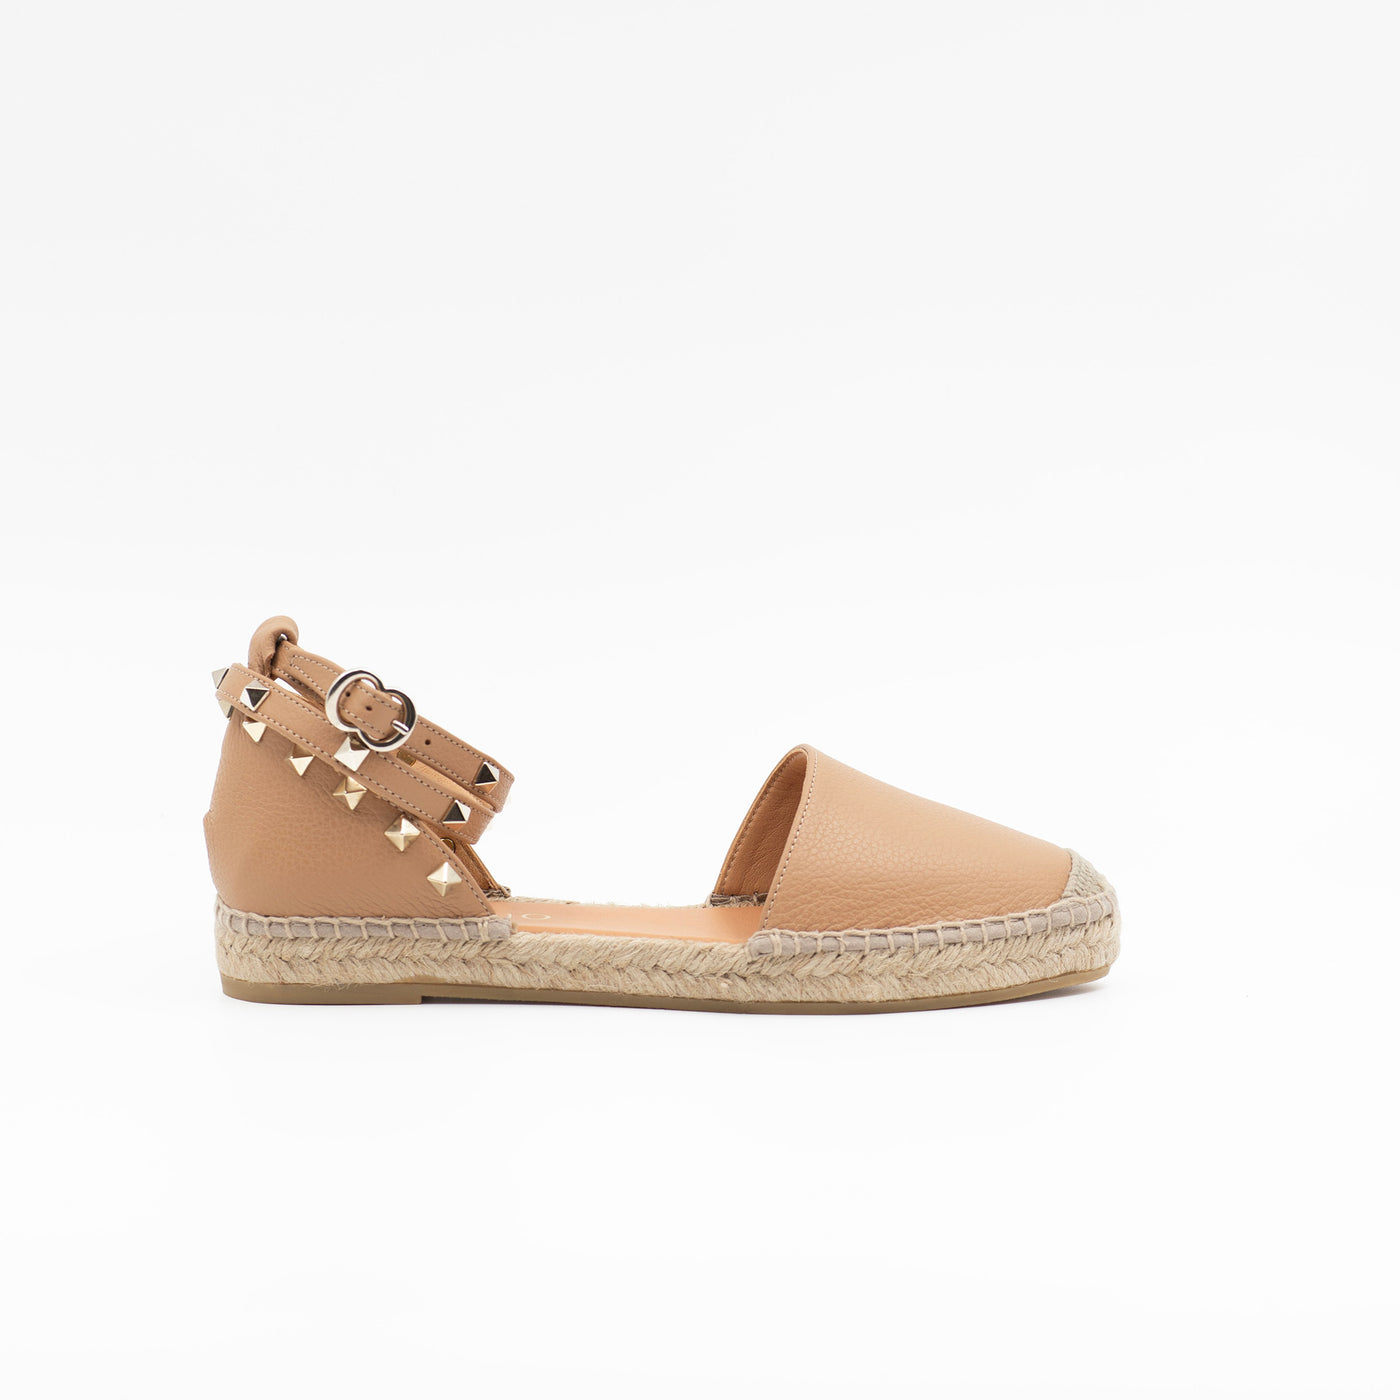 Beige leather espadrille with silver studs